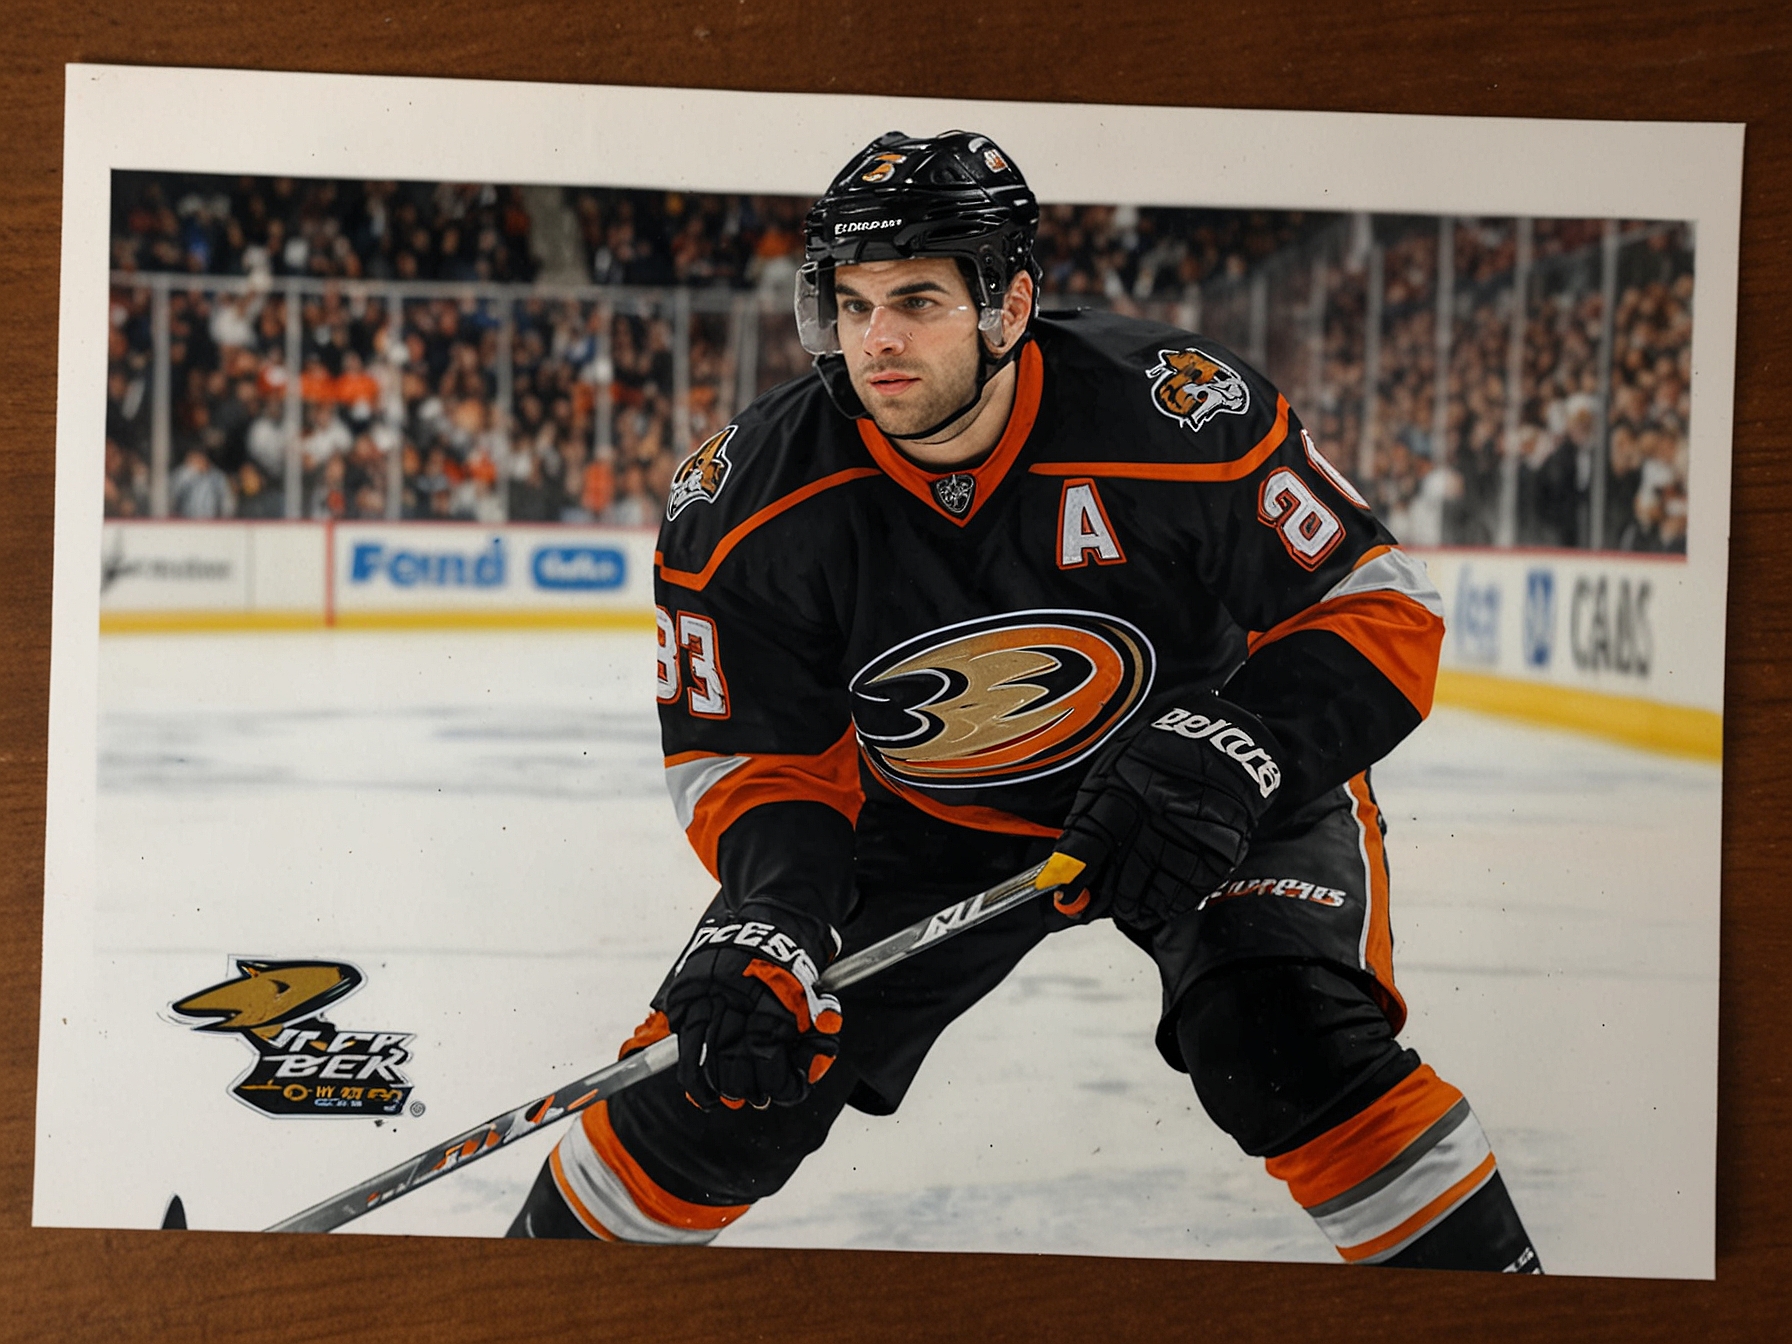 Andrew Cogliano in an Anaheim Ducks uniform is showcased during a game, emphasizing his speed and versatility which made him a pivotal player for the team over eight seasons.